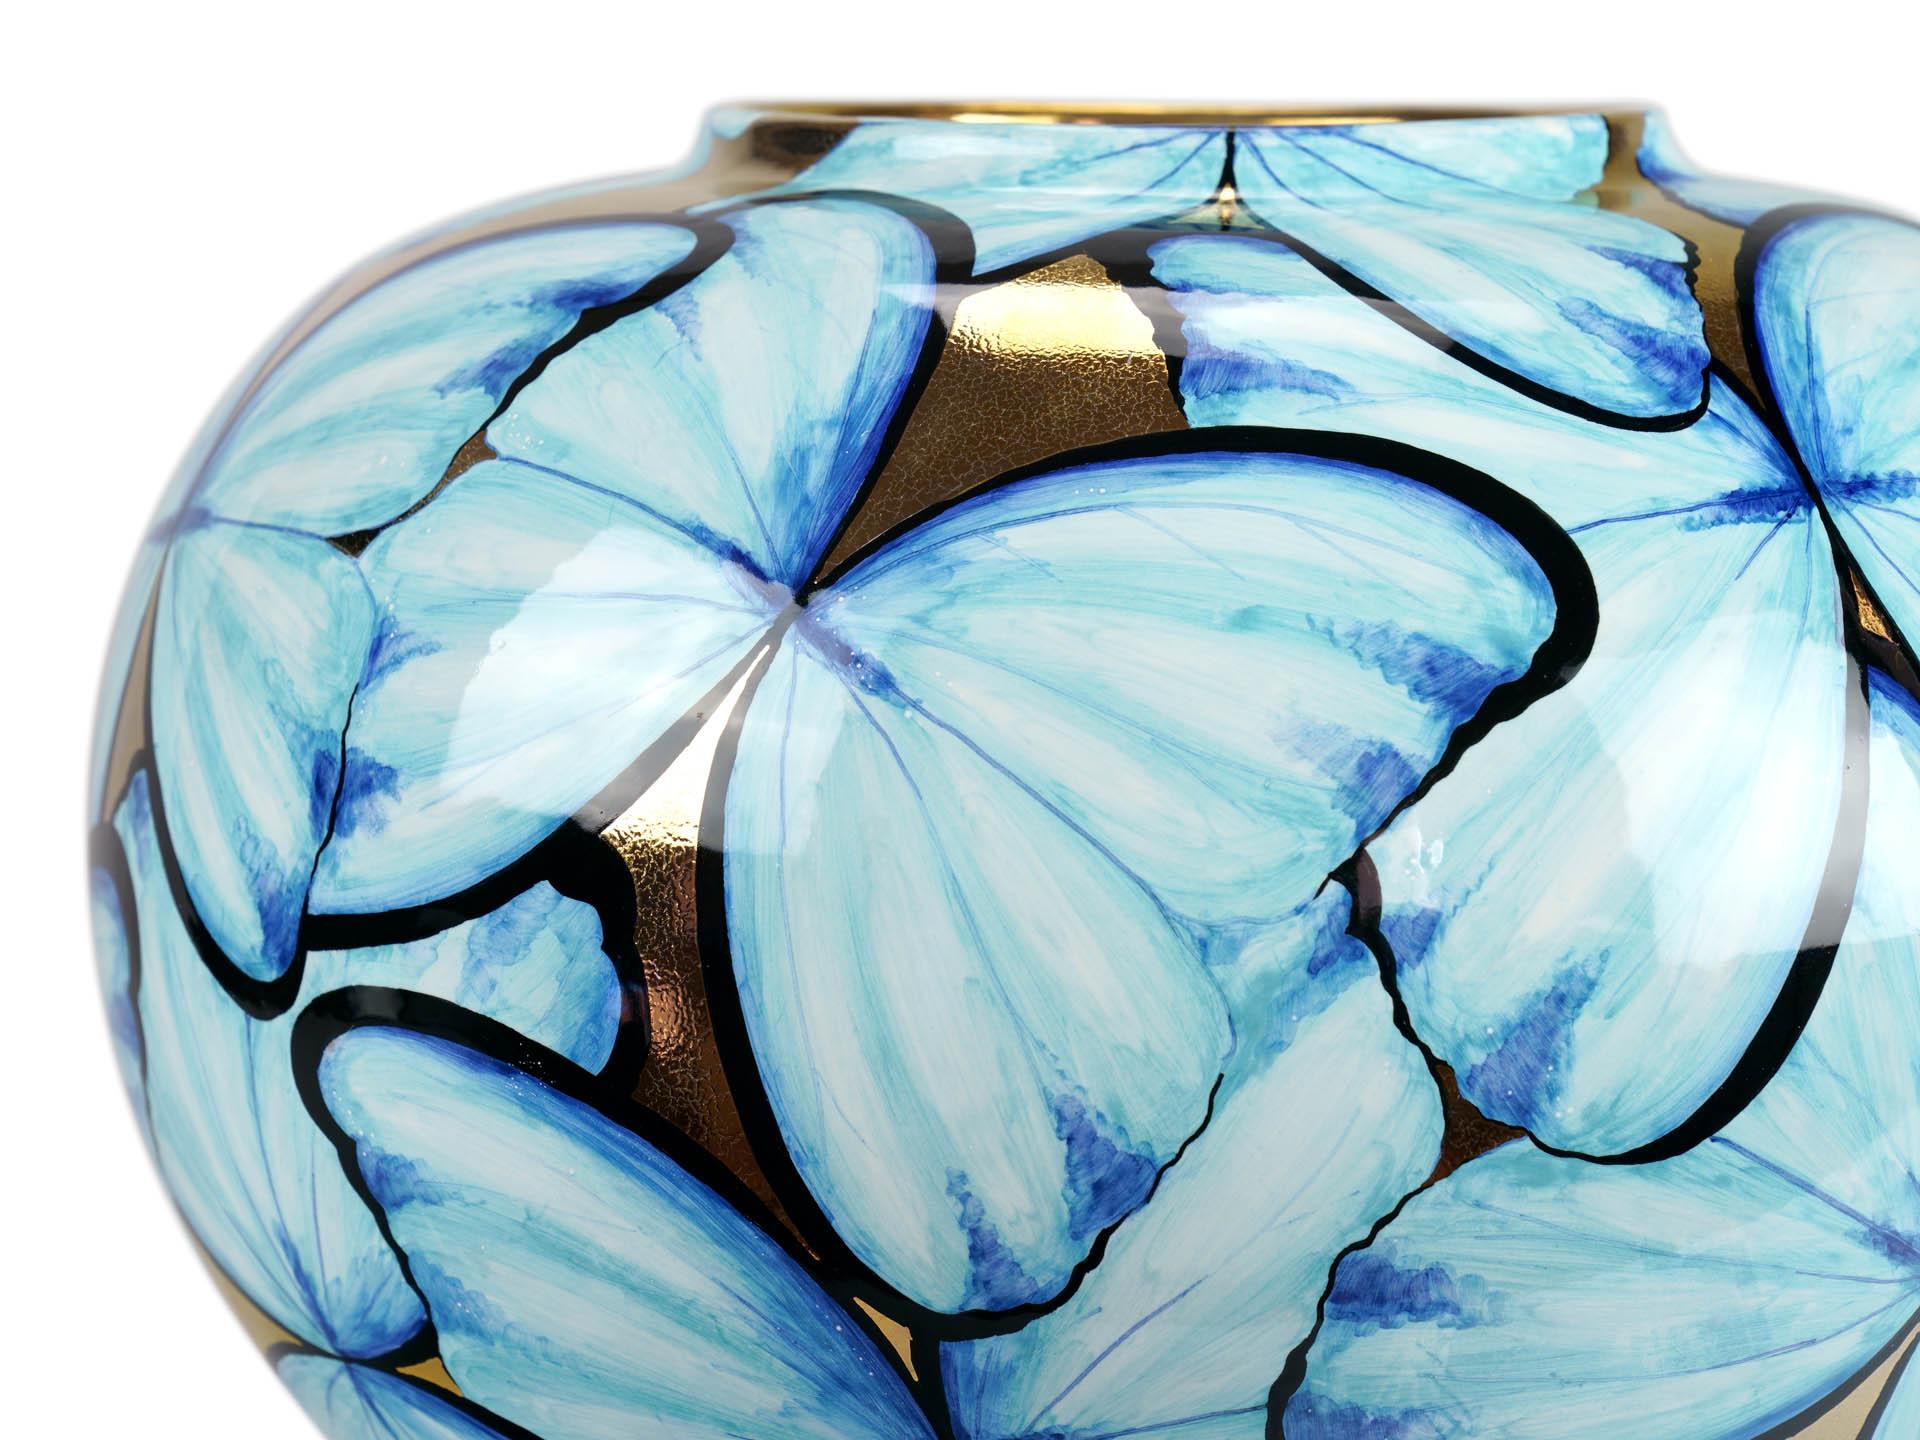 Contemporary Italian Hand-Painted Ceramic Vase Blue Butterflies on 24kt Gold Accented Surface For Sale